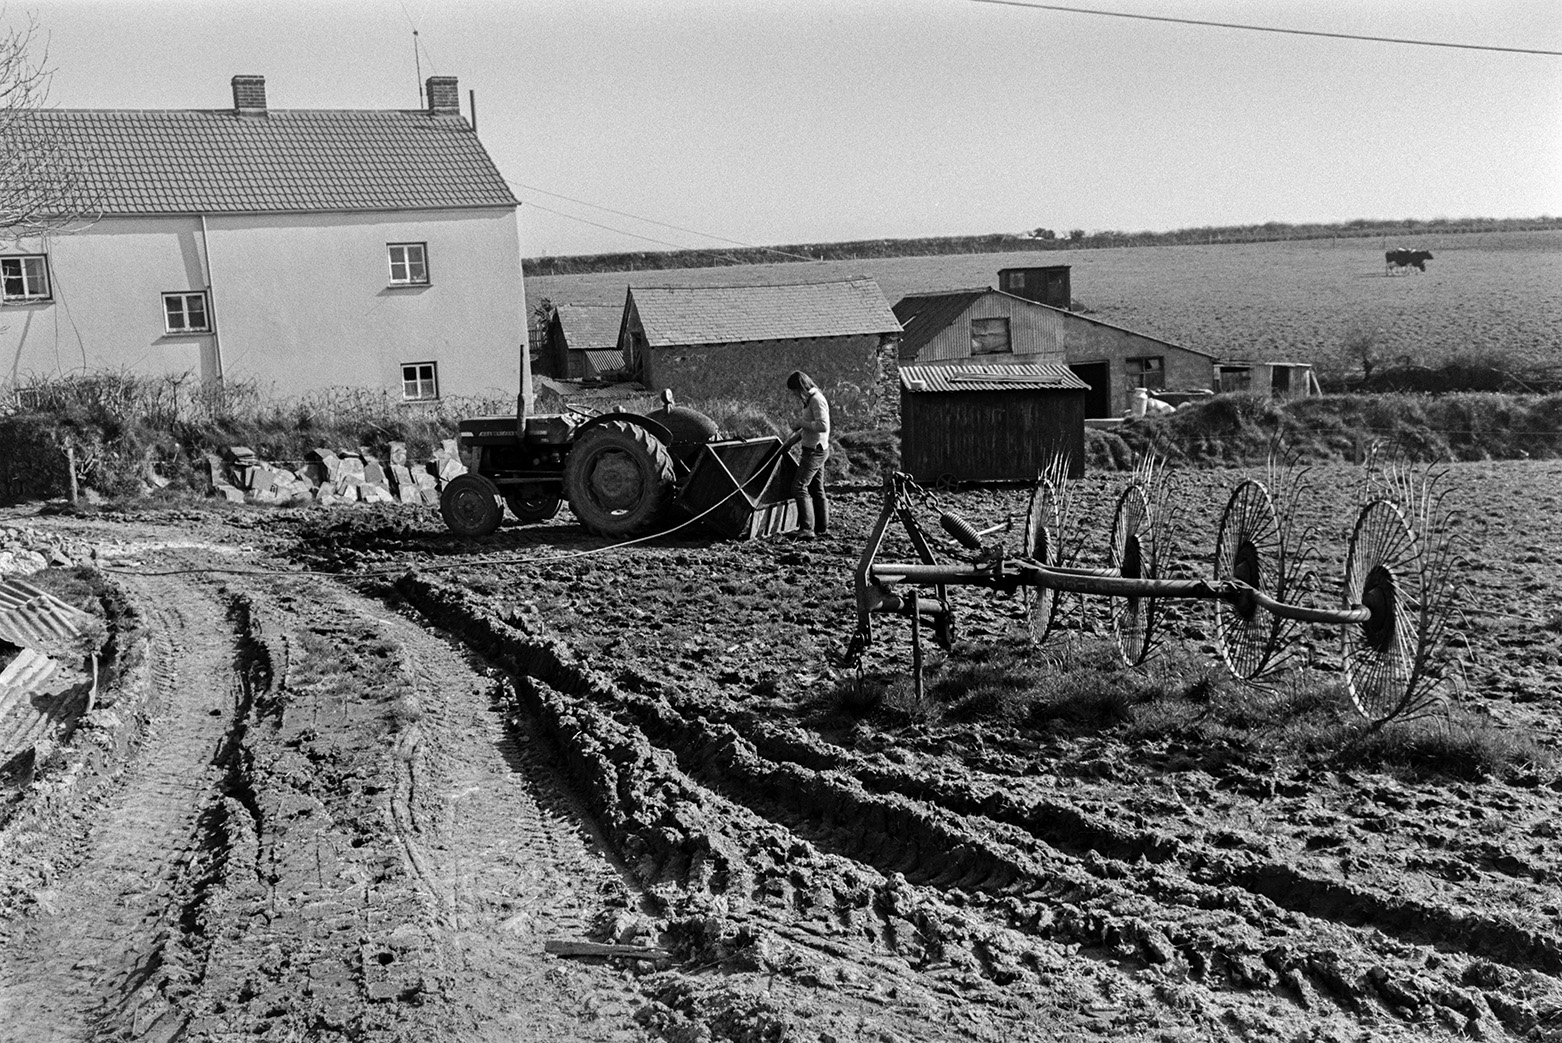 Derek Bright washing out a link box with a hose in a muddy field at Mill Road Farm, Beaford.  A whisk is lying next to a muddy track in the foreground and a farmhouse and barns can be seen in the background. The farm was also known as Jeffrys.